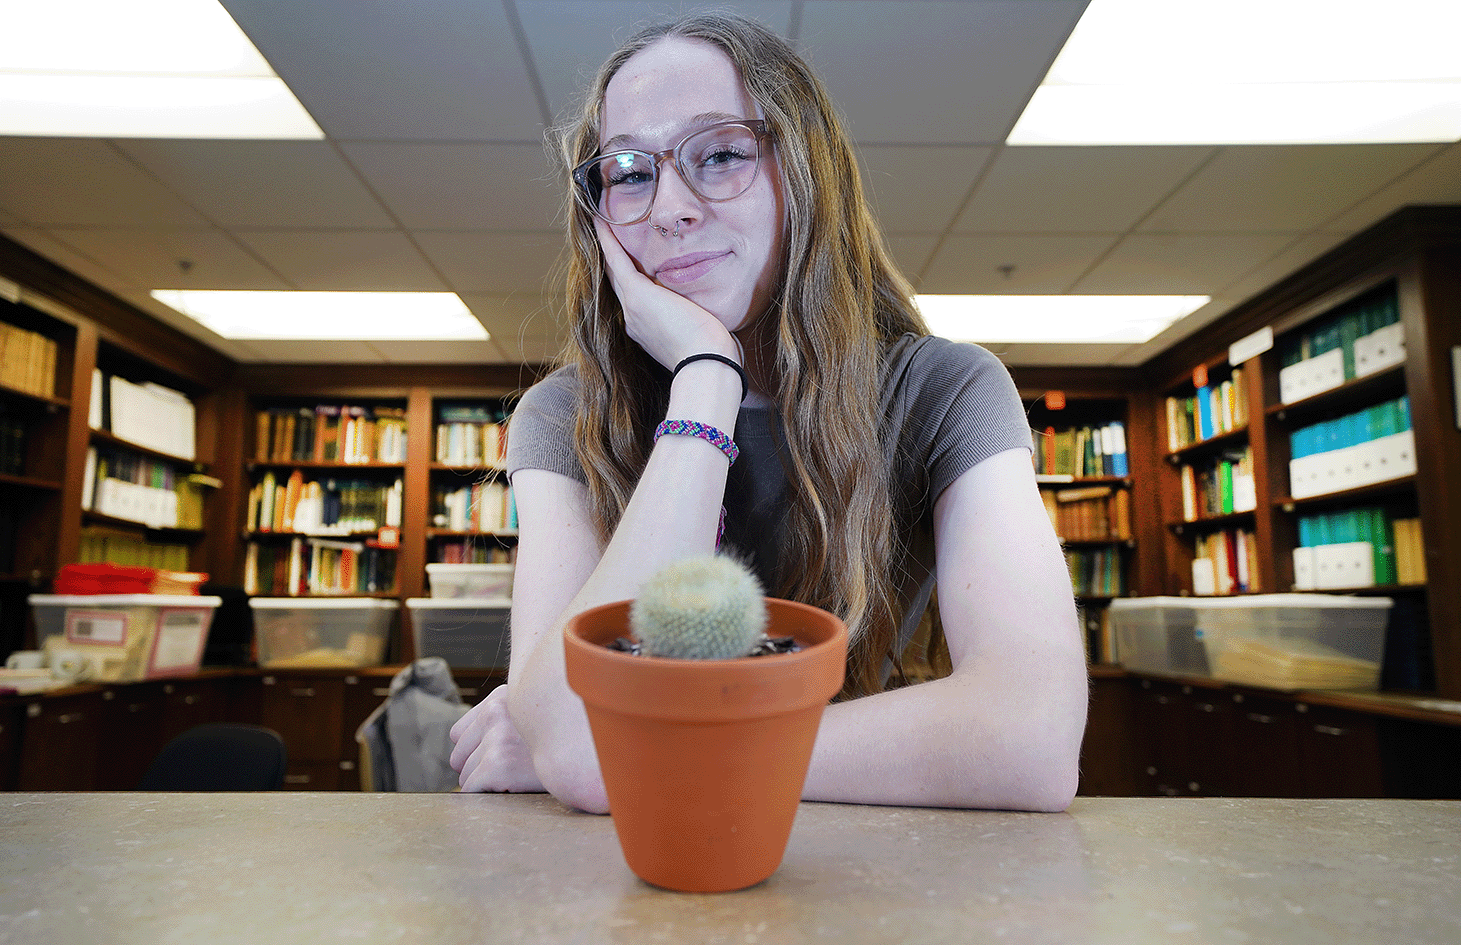 Sidney Bunch poses with the plant that got her started in studying botany, Mr. Cactus, in the library of the Purdue University Herbaria in Lily Hall